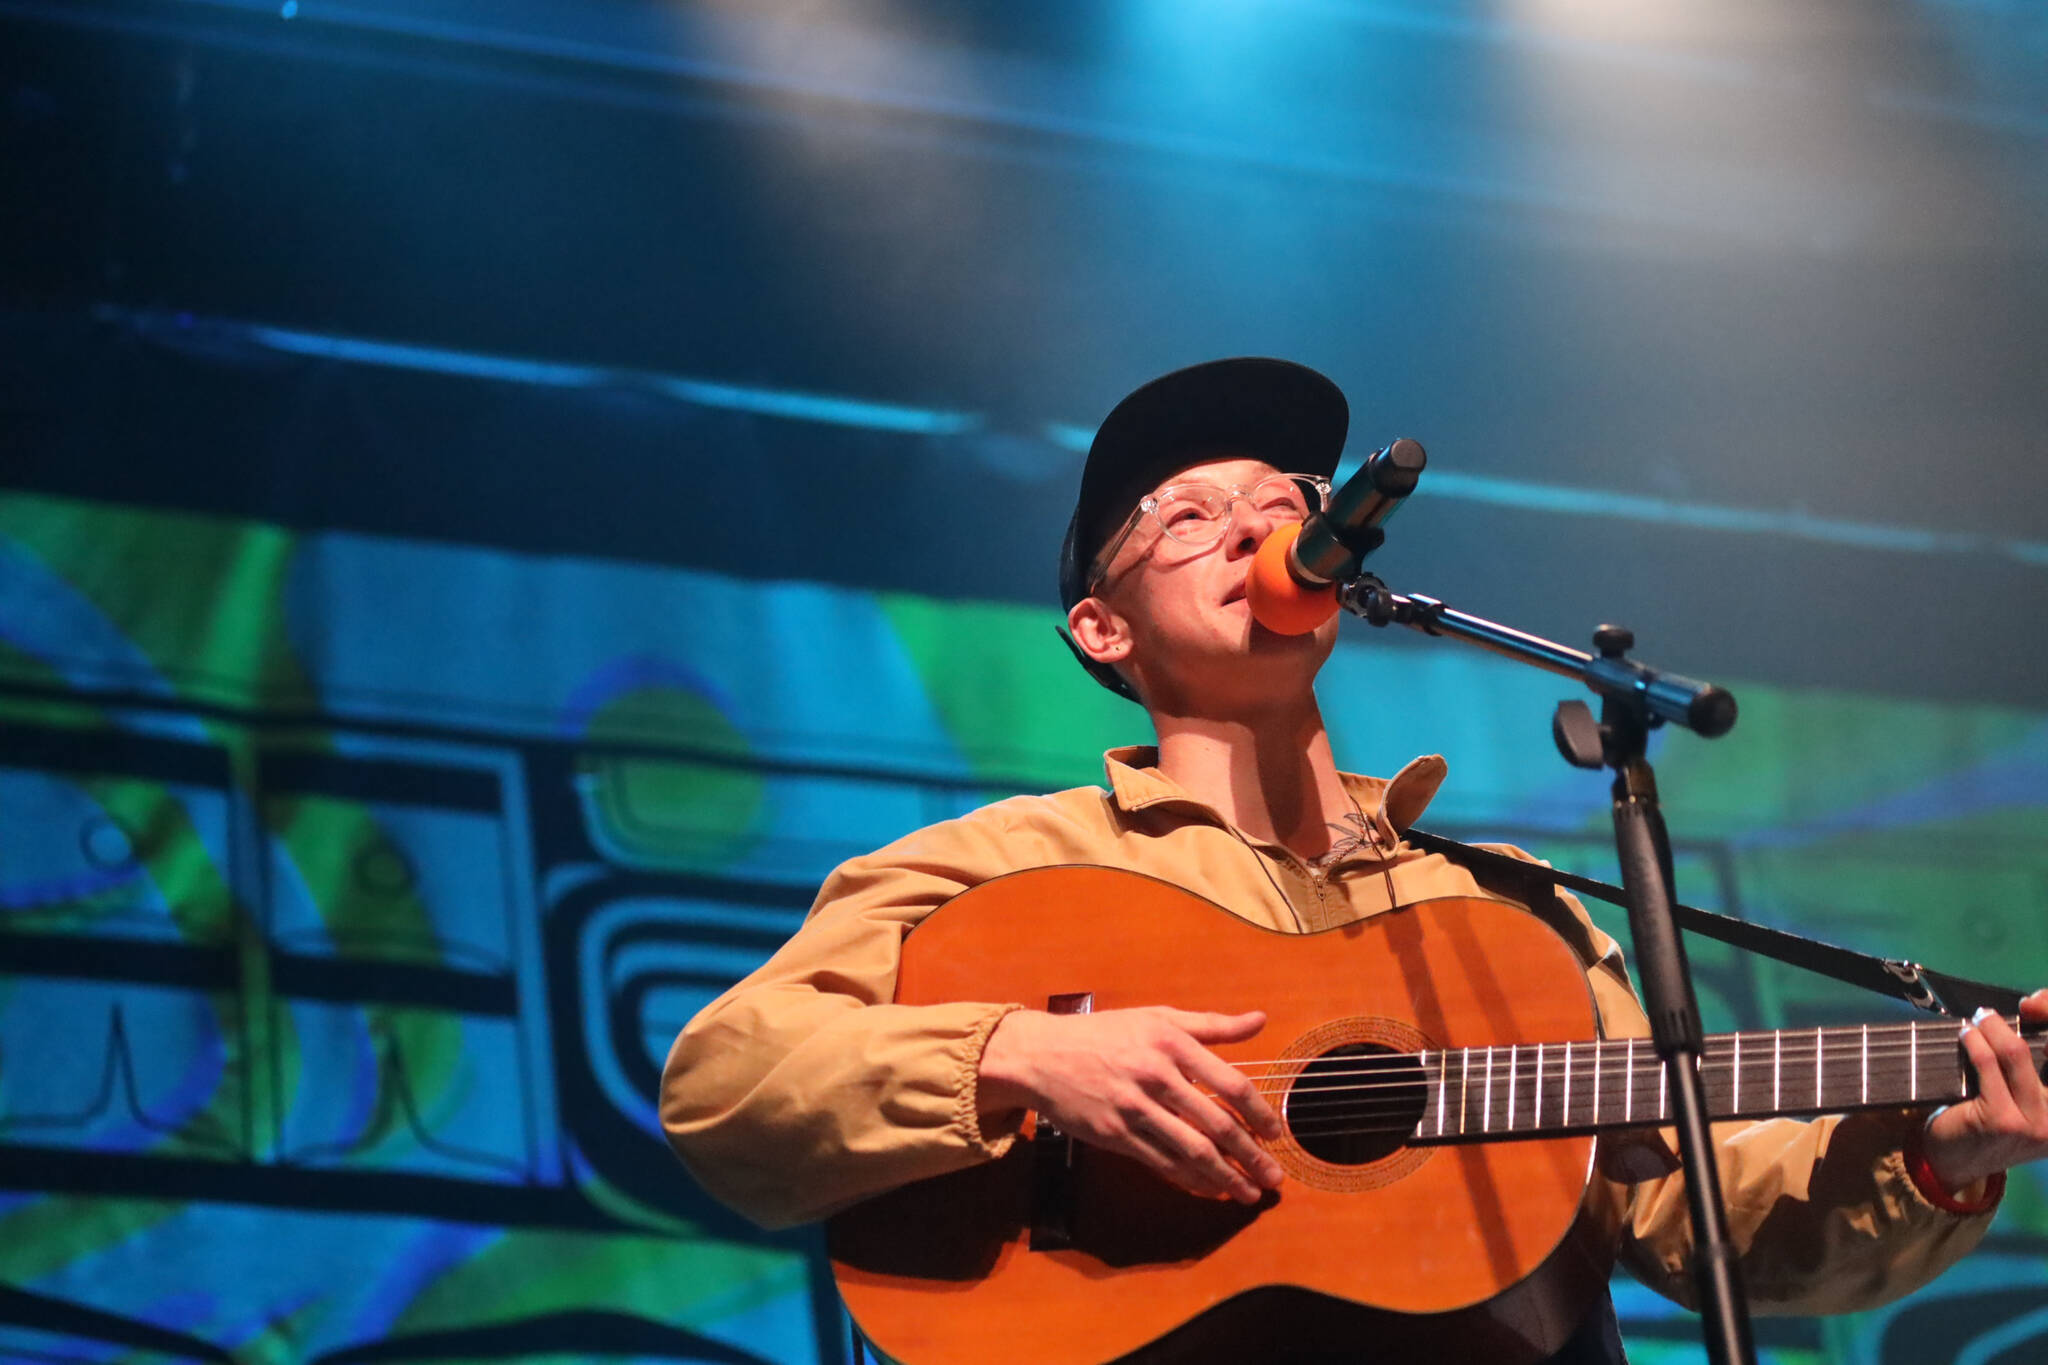 Anchorage musician Quinn Christopherson sings to the crowd during a performance as part of the final night of the Áak’w Rock music festival at Centennial Hall Saturday evening. (Clarise Larson / Juneau Empire)